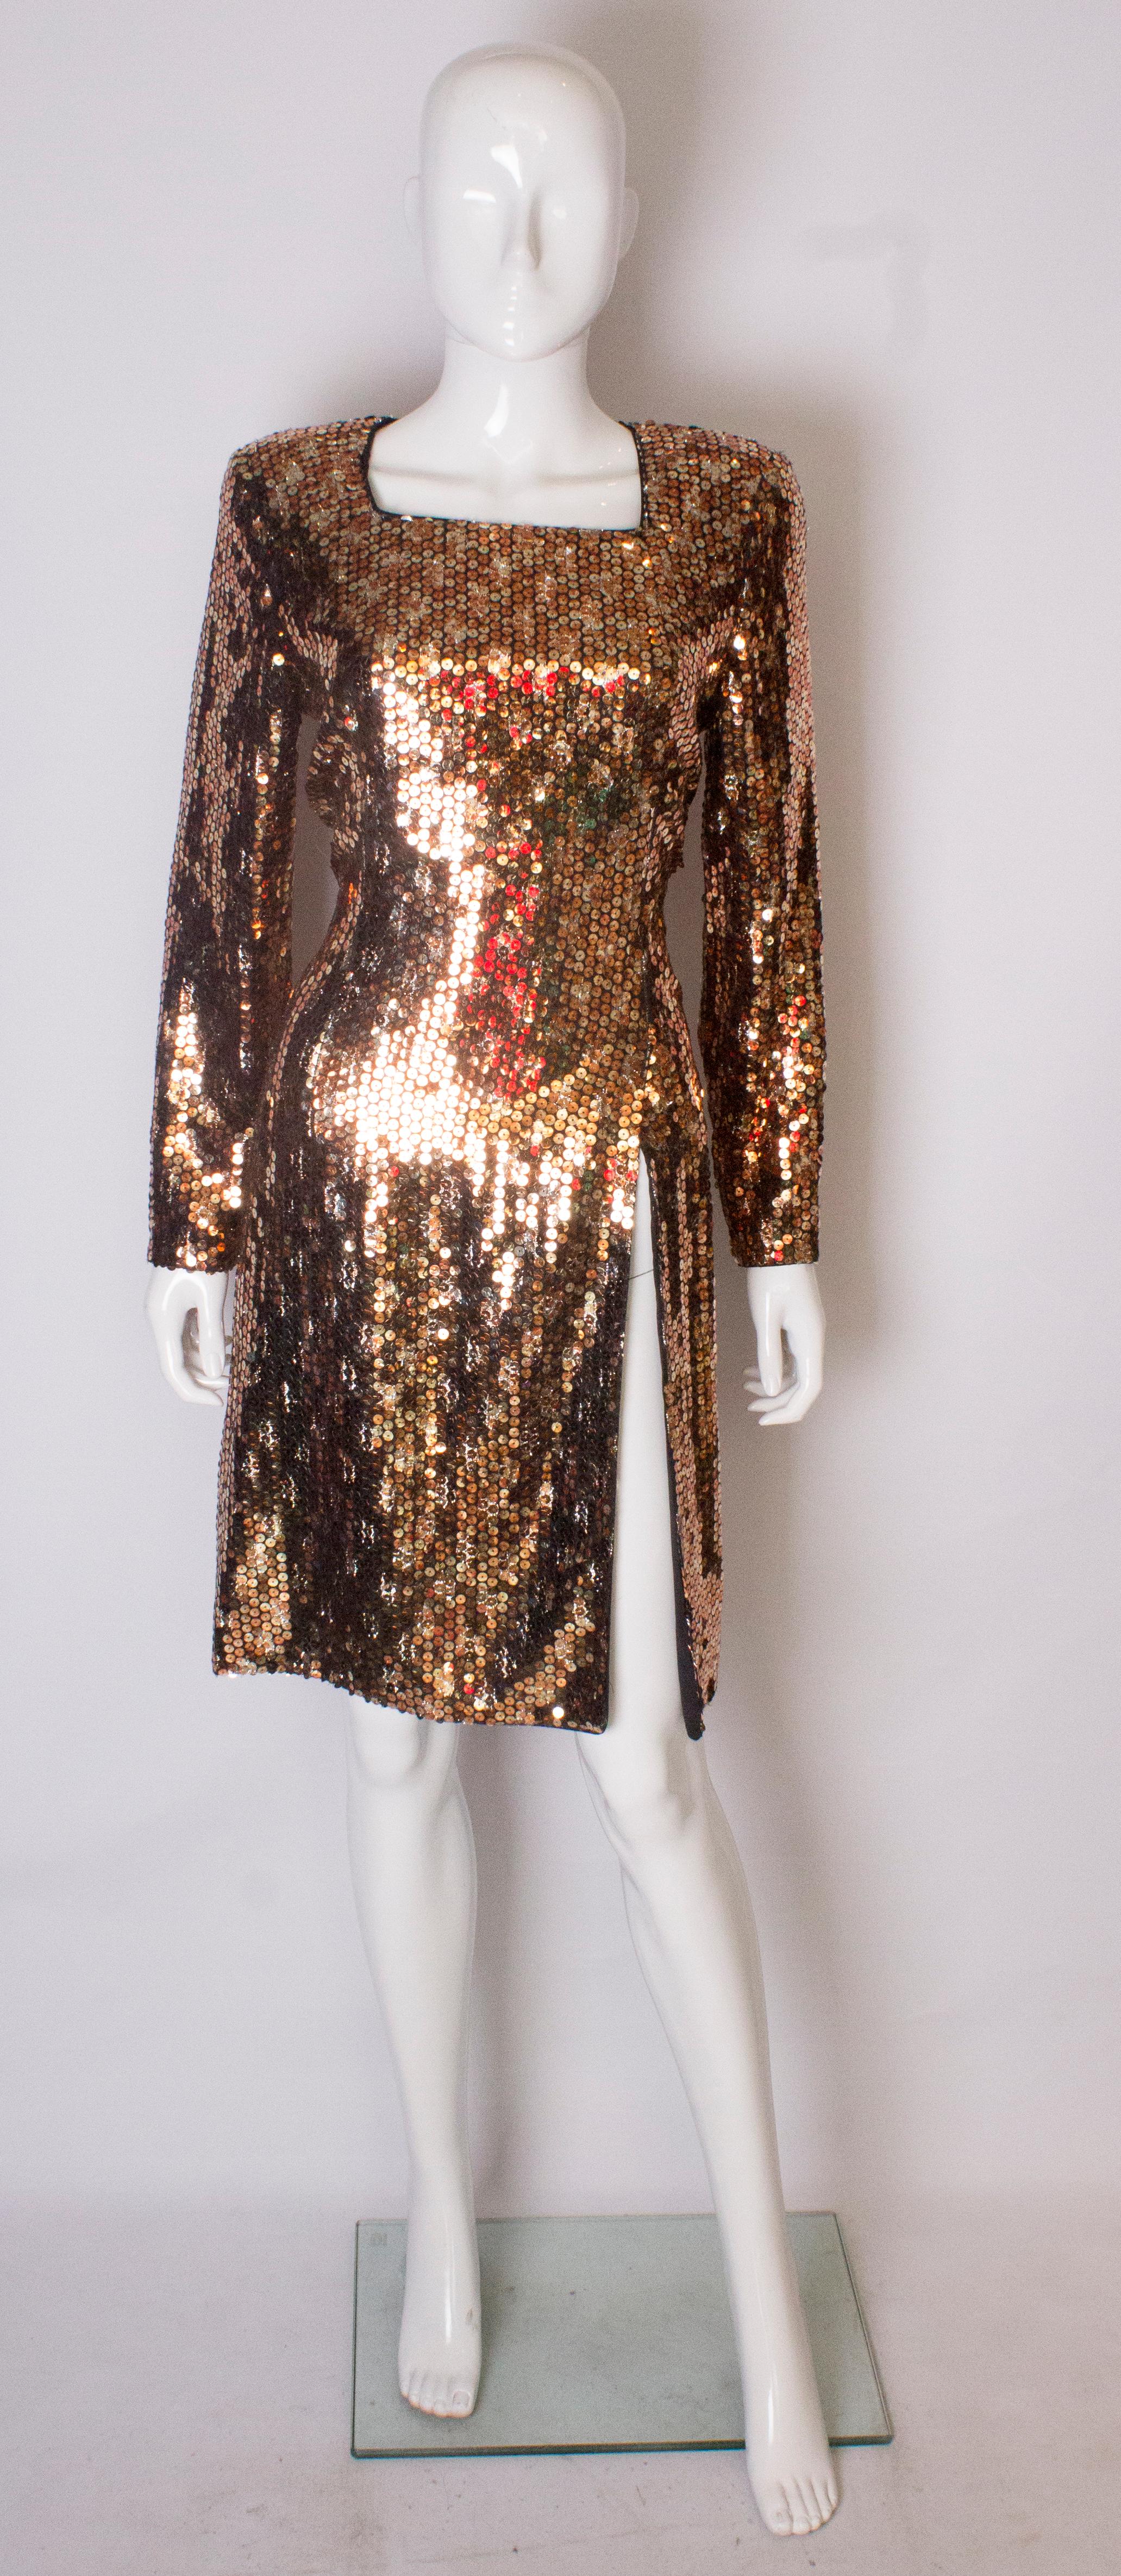 A headturning party dress  by Mani. The dress is in a wonderful mix of copper colour sequins backed with pieces of net. It has a square neckline, and a central back zip, There is a 20'' slit at the front ( good for dancing) and the dress is fully